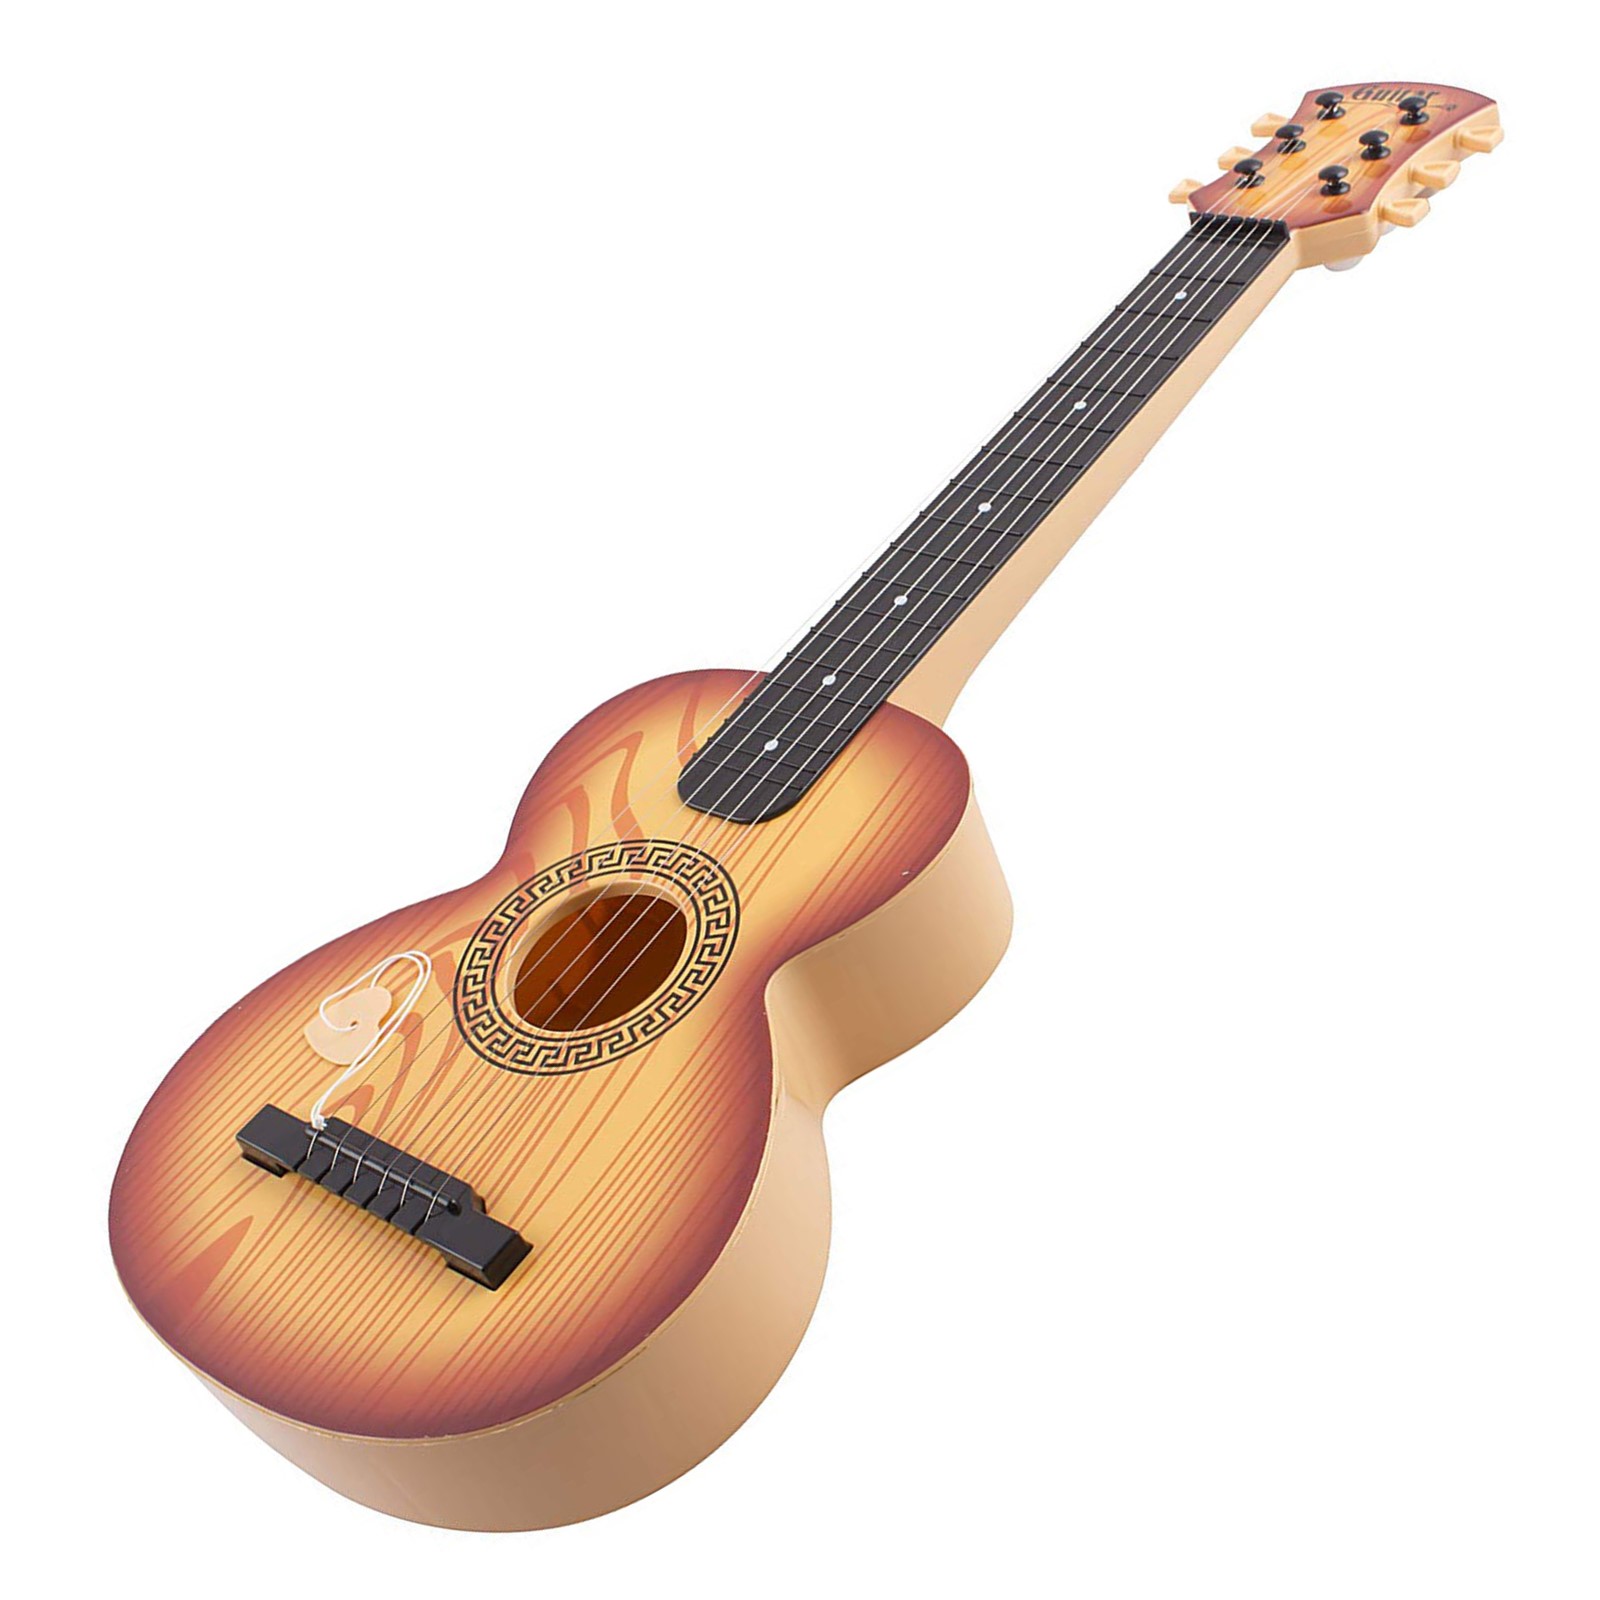 Toy Guitar Rock Star 6 String Acoustic Kids 25.5" Ukulele With Guitar Pick Children's Musical Instrument Vibrant Sound And Color Tunable Perfect For Learning How To Play Educational Light Brown